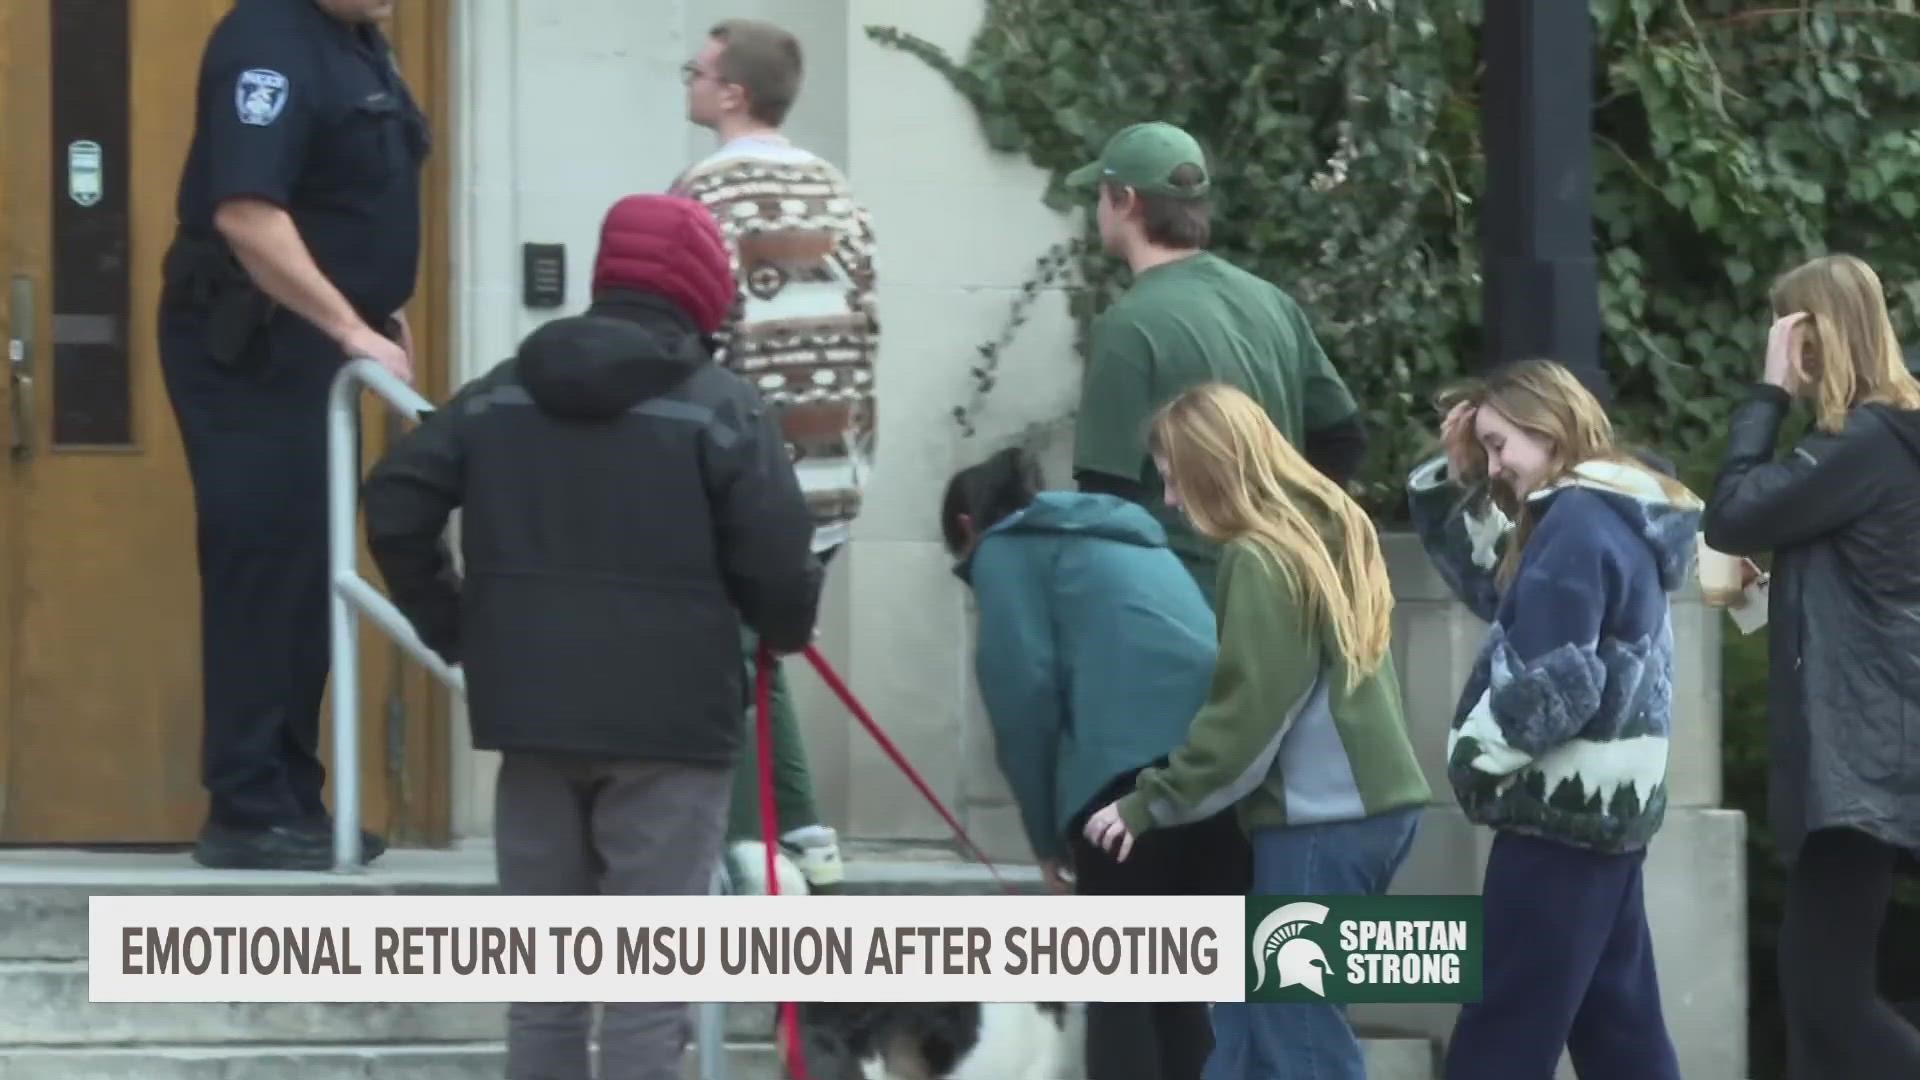 Today, students were allowed back in the MSU Union to get their belongings alongside FBI agents and mental health professionals.